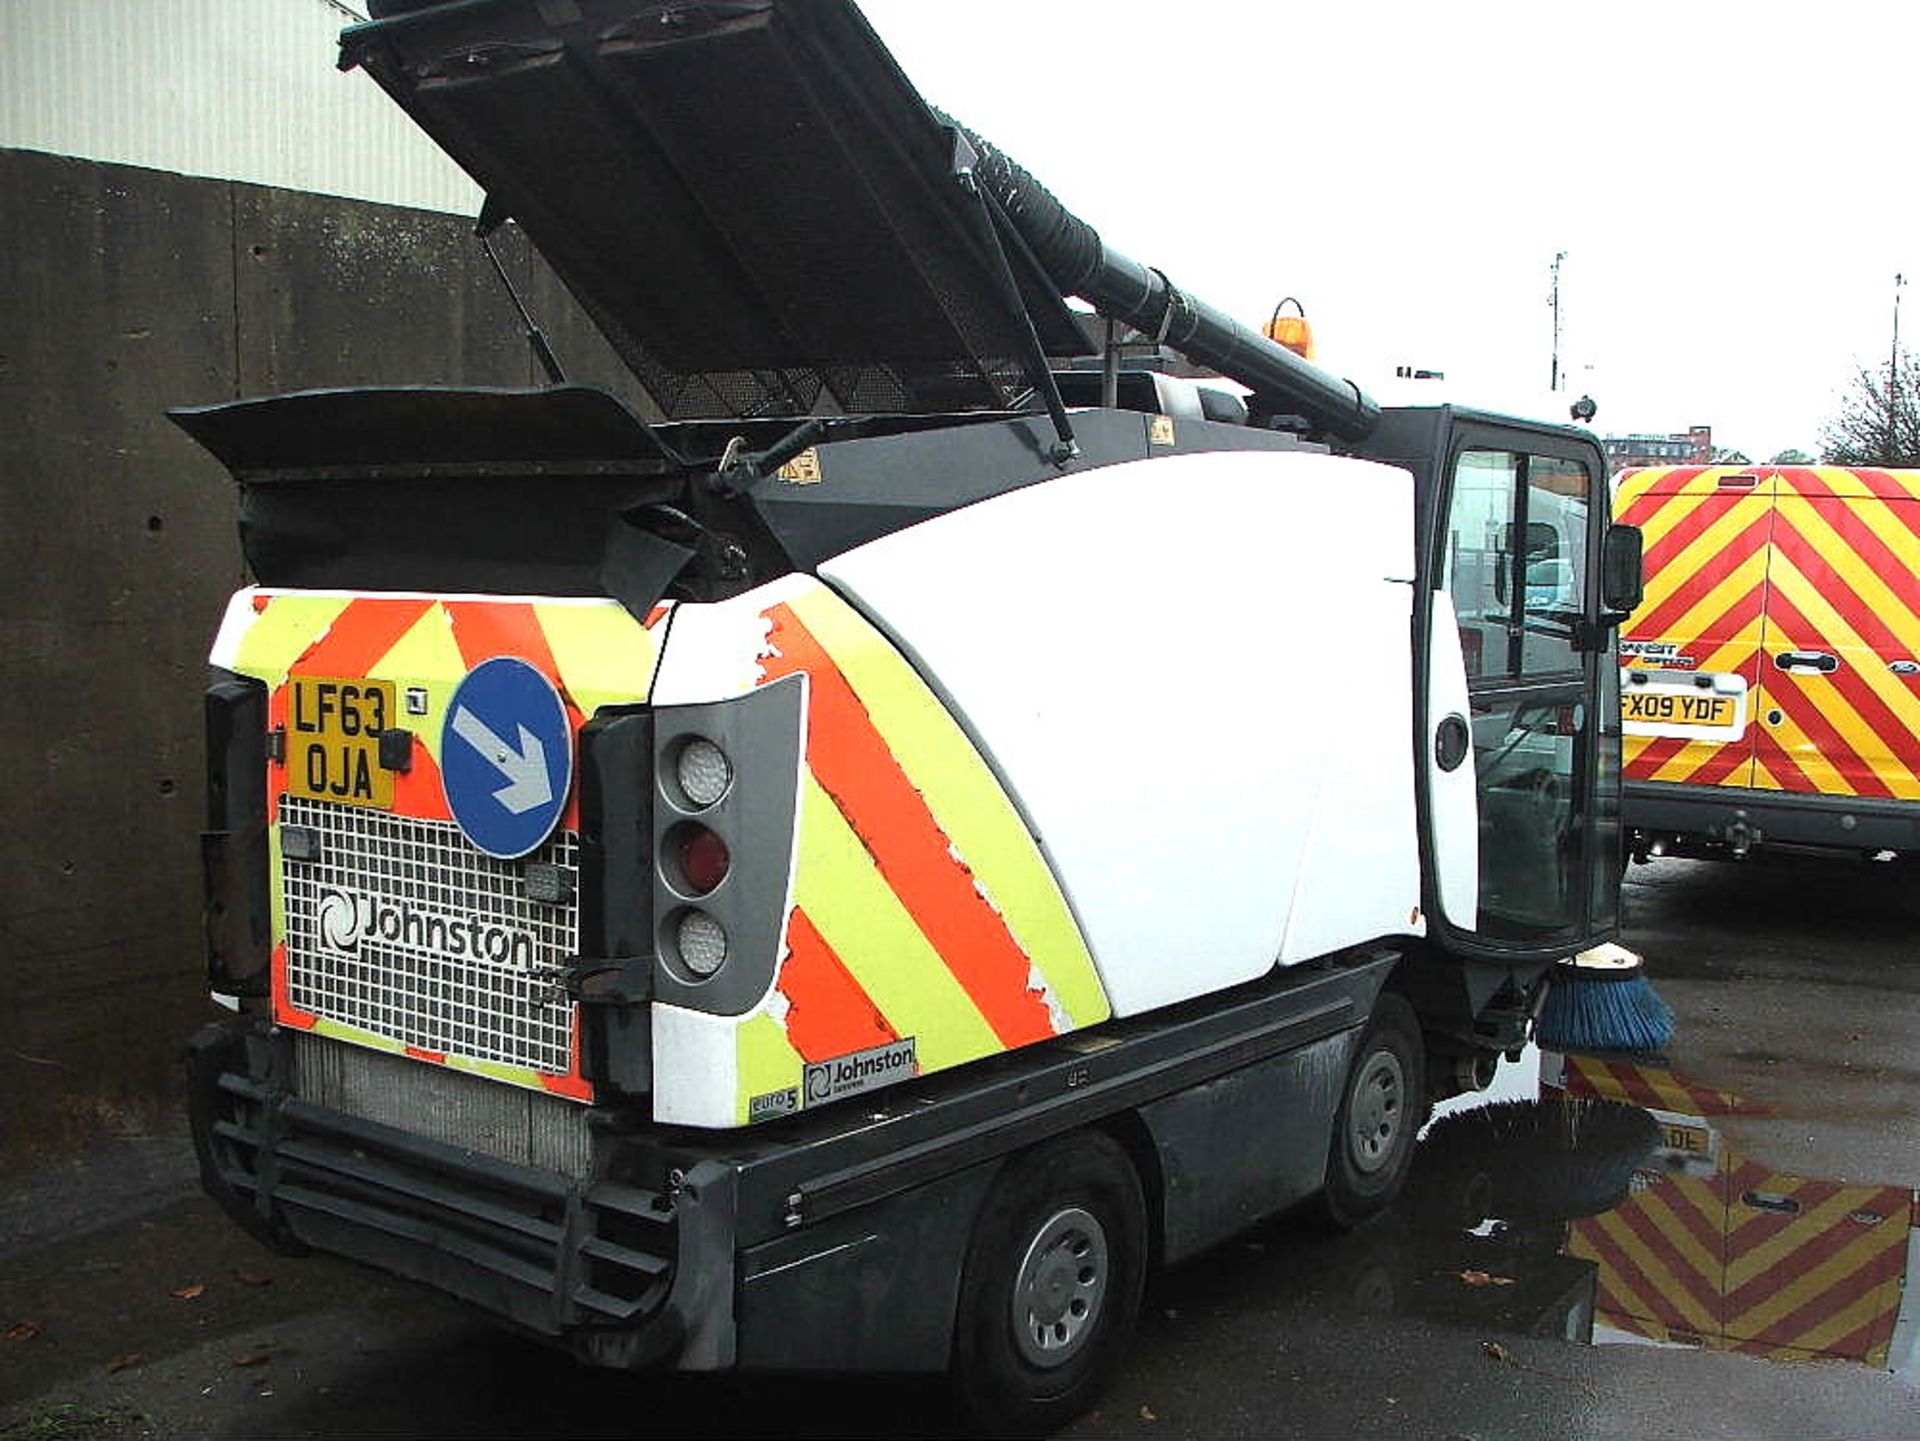 JOHNSTON CX201 COMPACT ROAD SWEEPER 3465 HRS ALL ROUND CCTV SYSTEM - Image 2 of 5